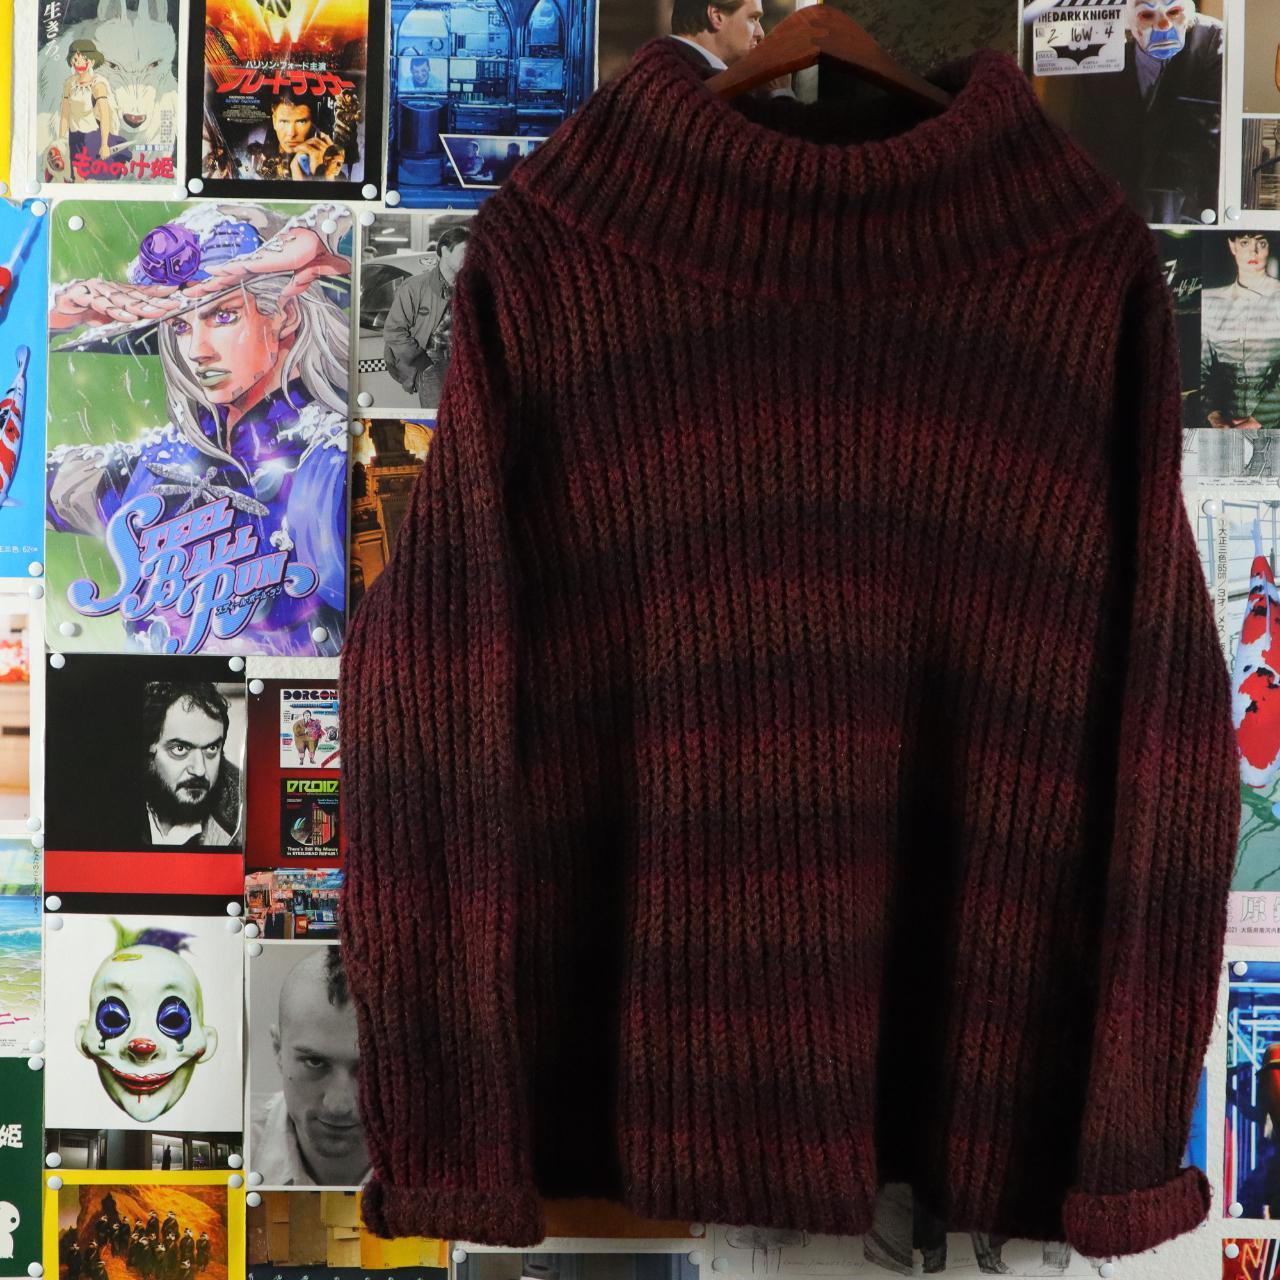 Product Image 1 - Vintage Sweater
In good Condition
Size L

Measurements:
Pit